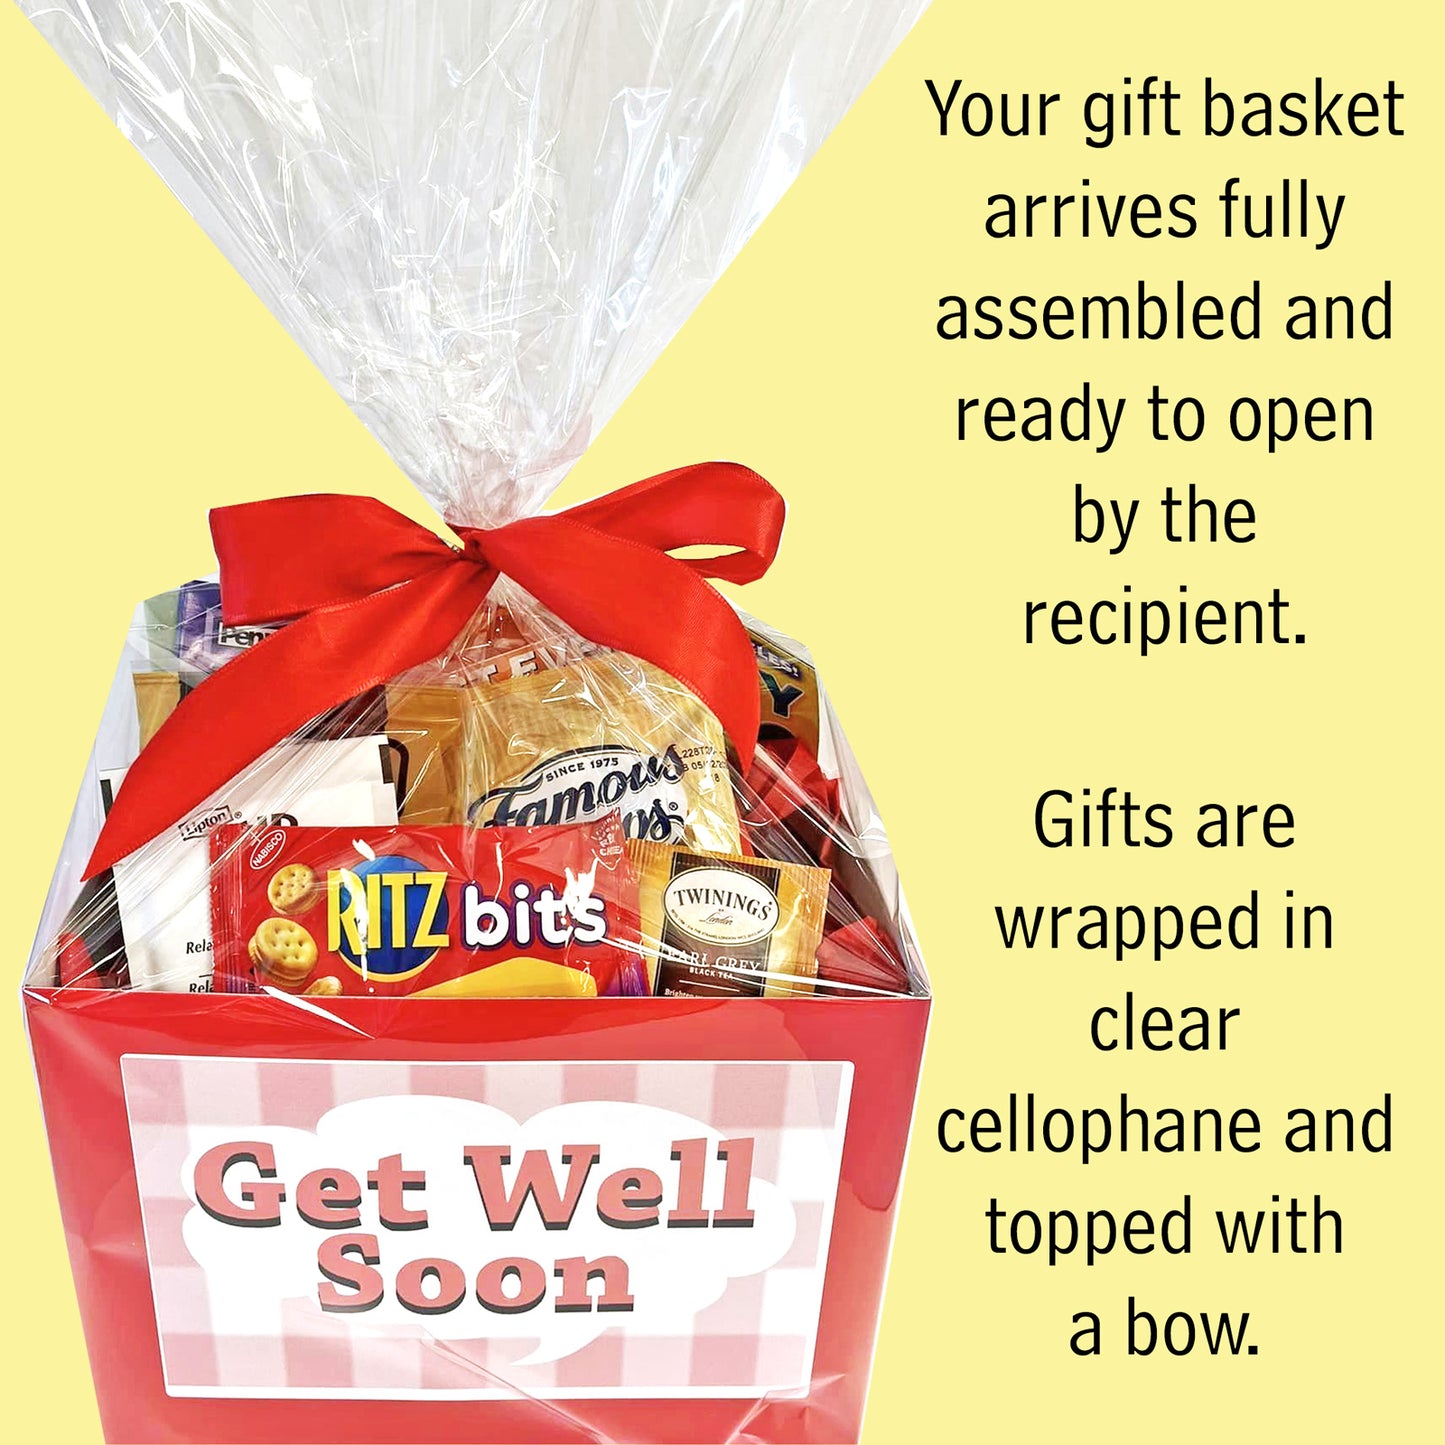 Comforting Gift Box for Get Well, Thinking of You, After Surgery, Recovery, Illness Gift Basket has Food and Boredom Busters for Men, Women, Friends and Family